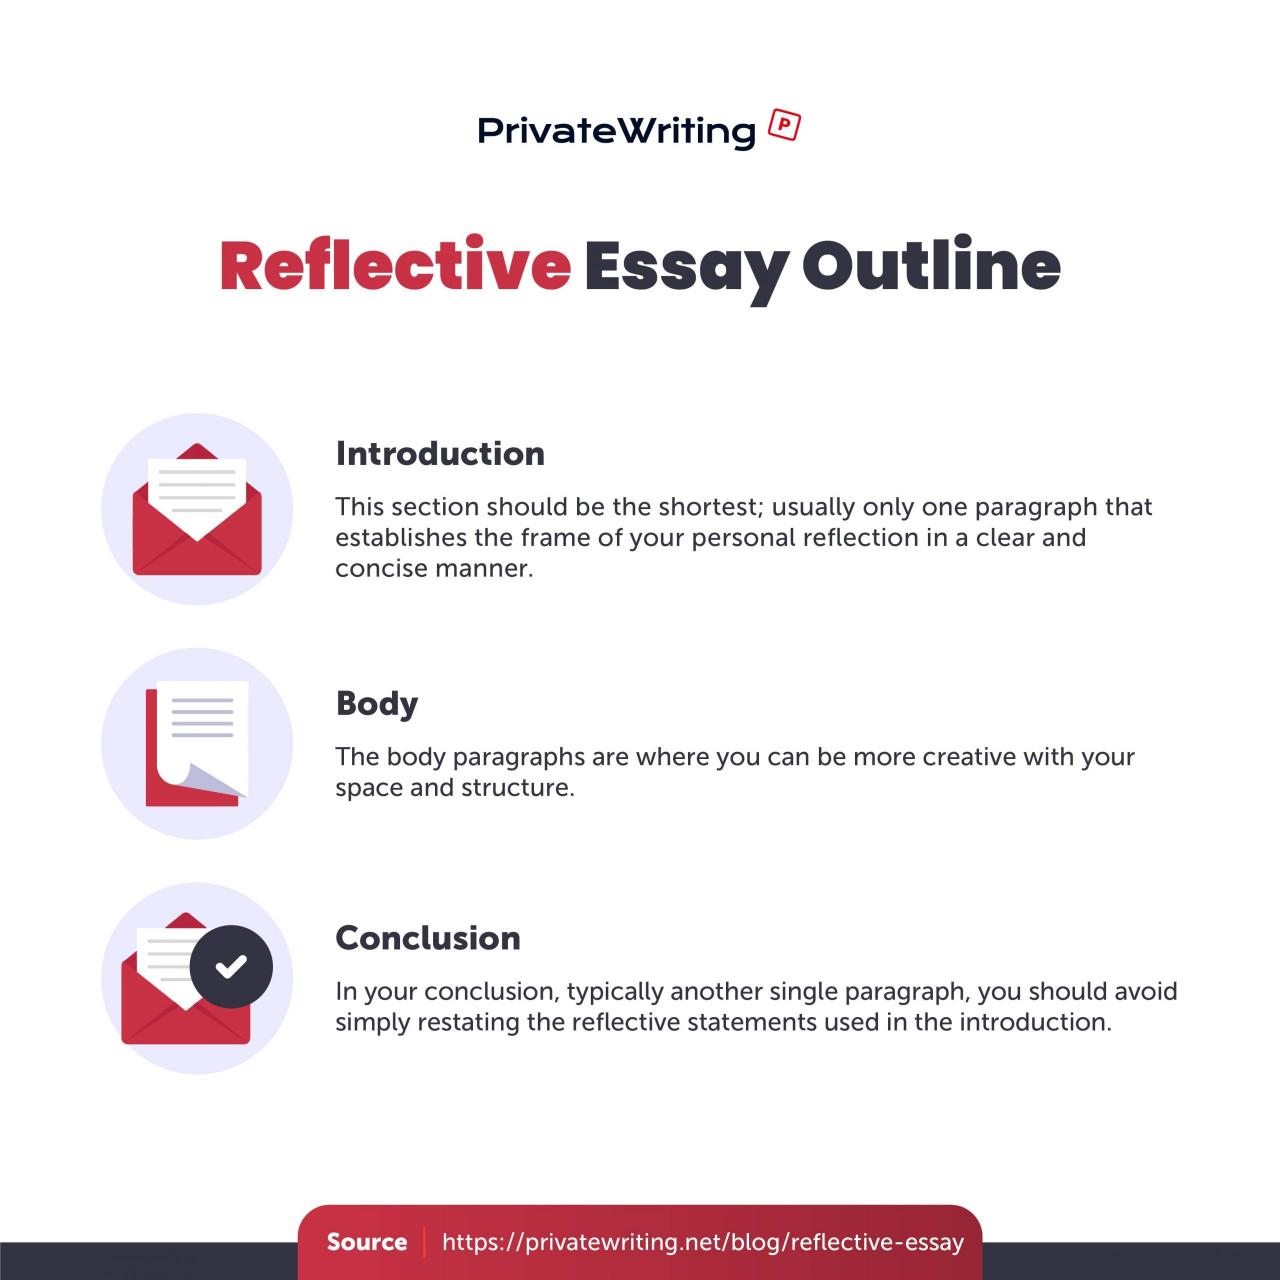 A reflective essay is best described as an essay that